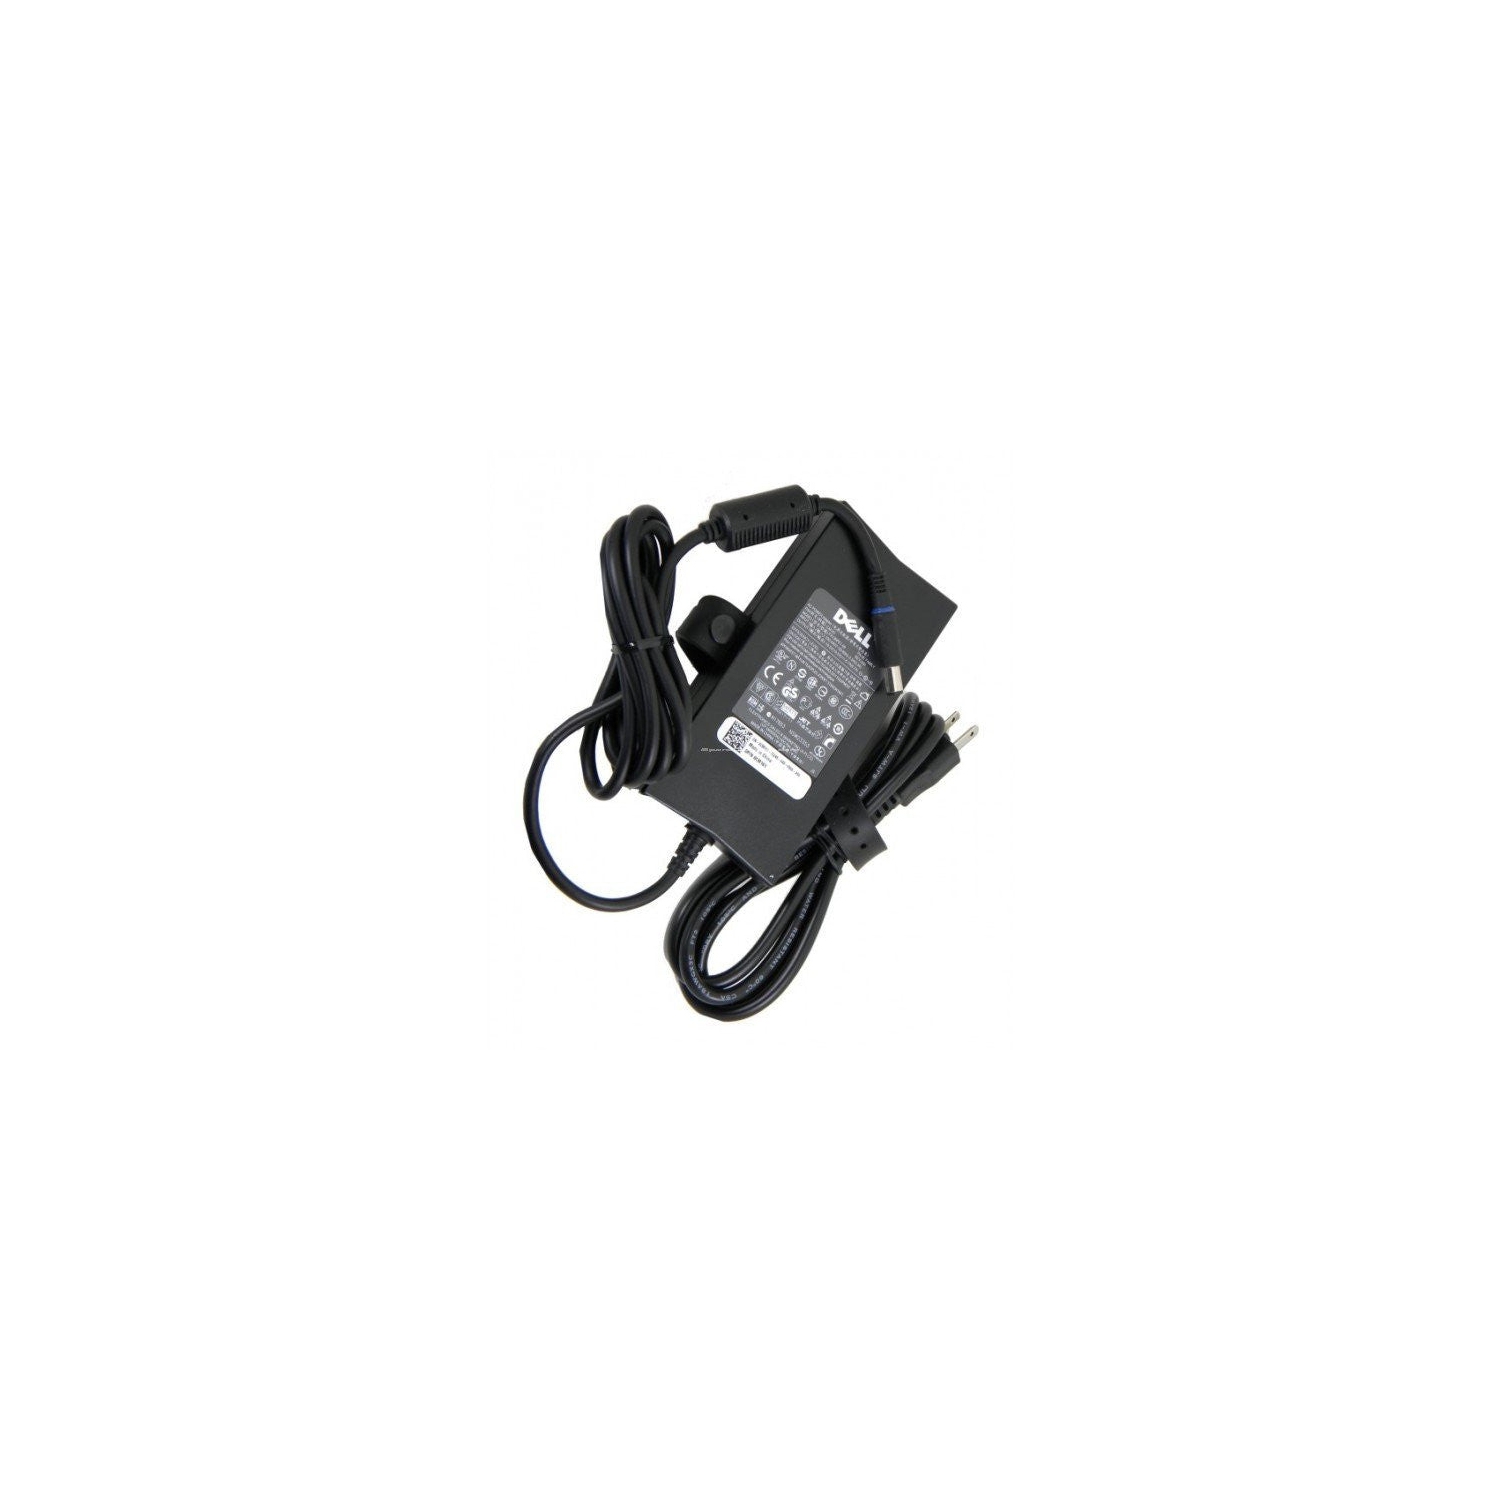 New Genuine Dell Inspiron 5150 5160 9300 Laptop AC Adapter Charger & Power Cord 130W